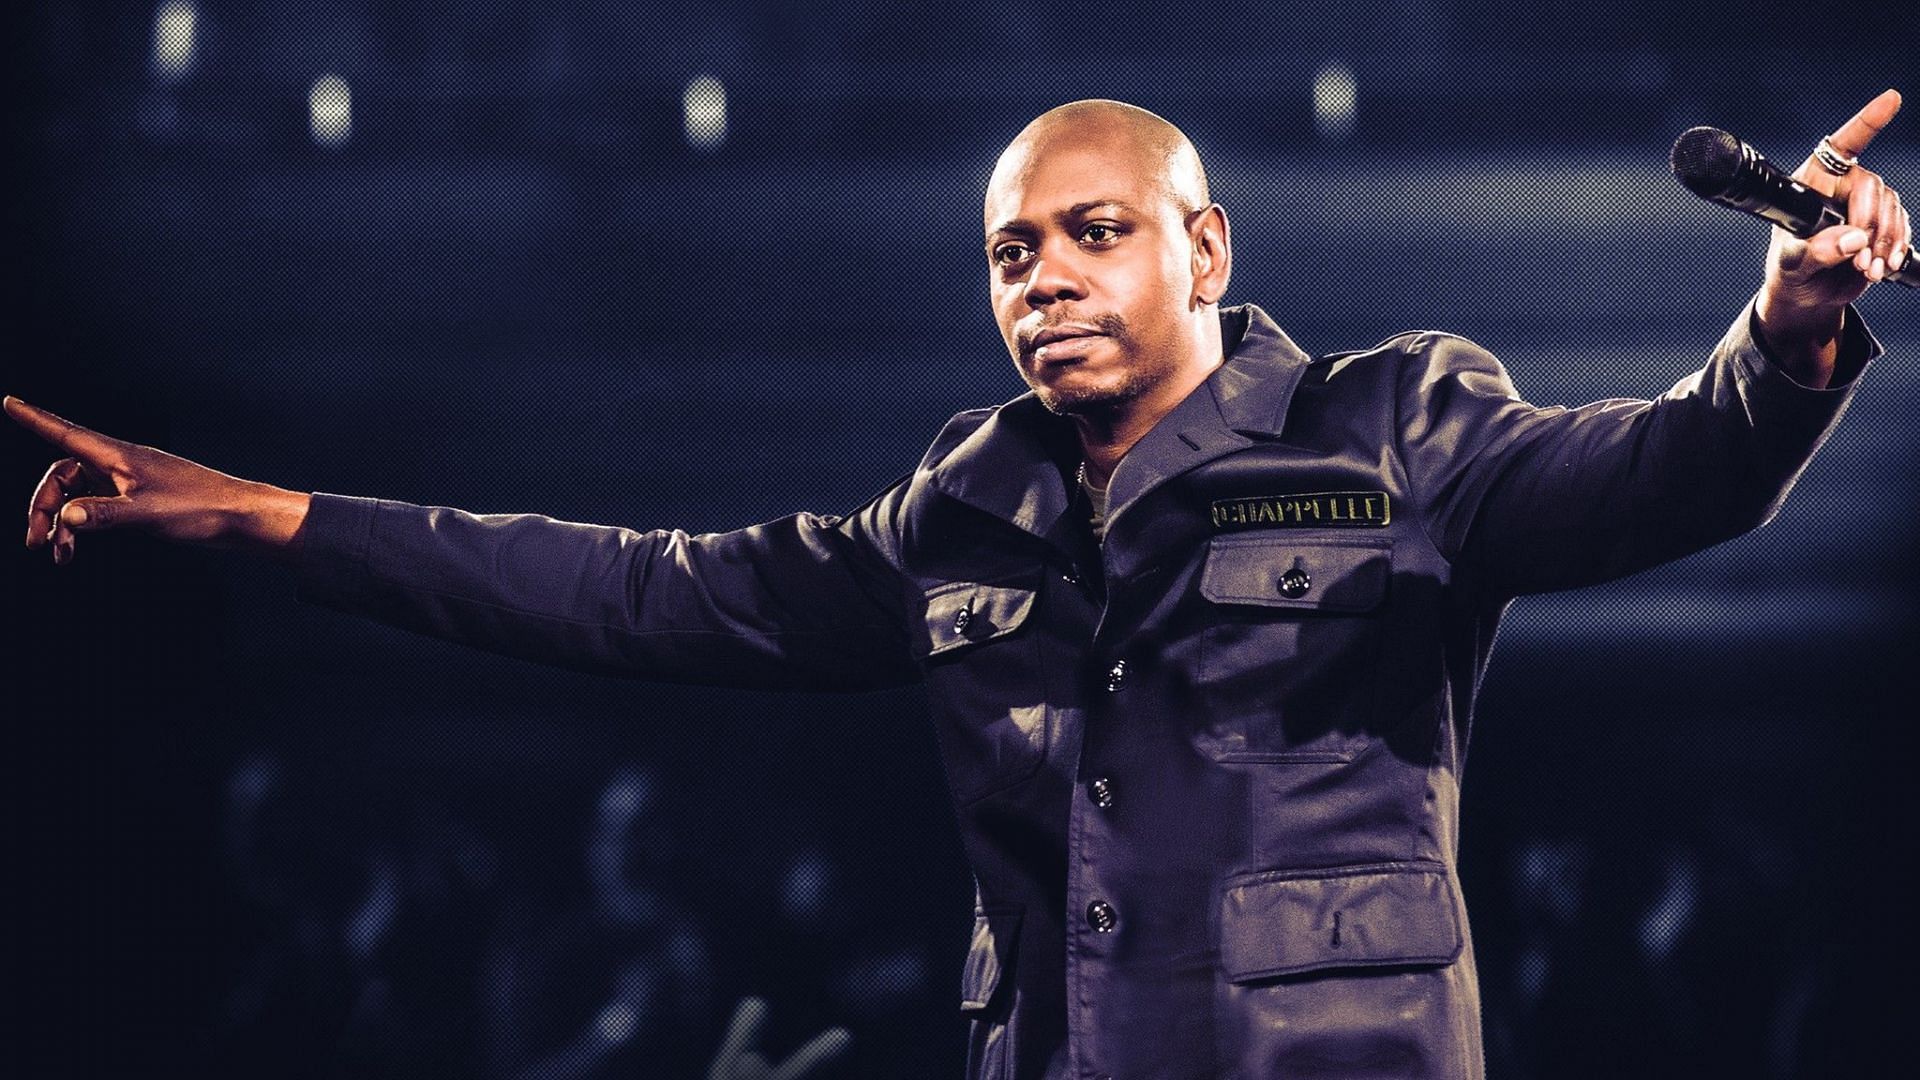 Dave Chappelle is under fire for making transphobic comments in his Netflix special show &#039;The Closer&#039; (Image via Getty Images)